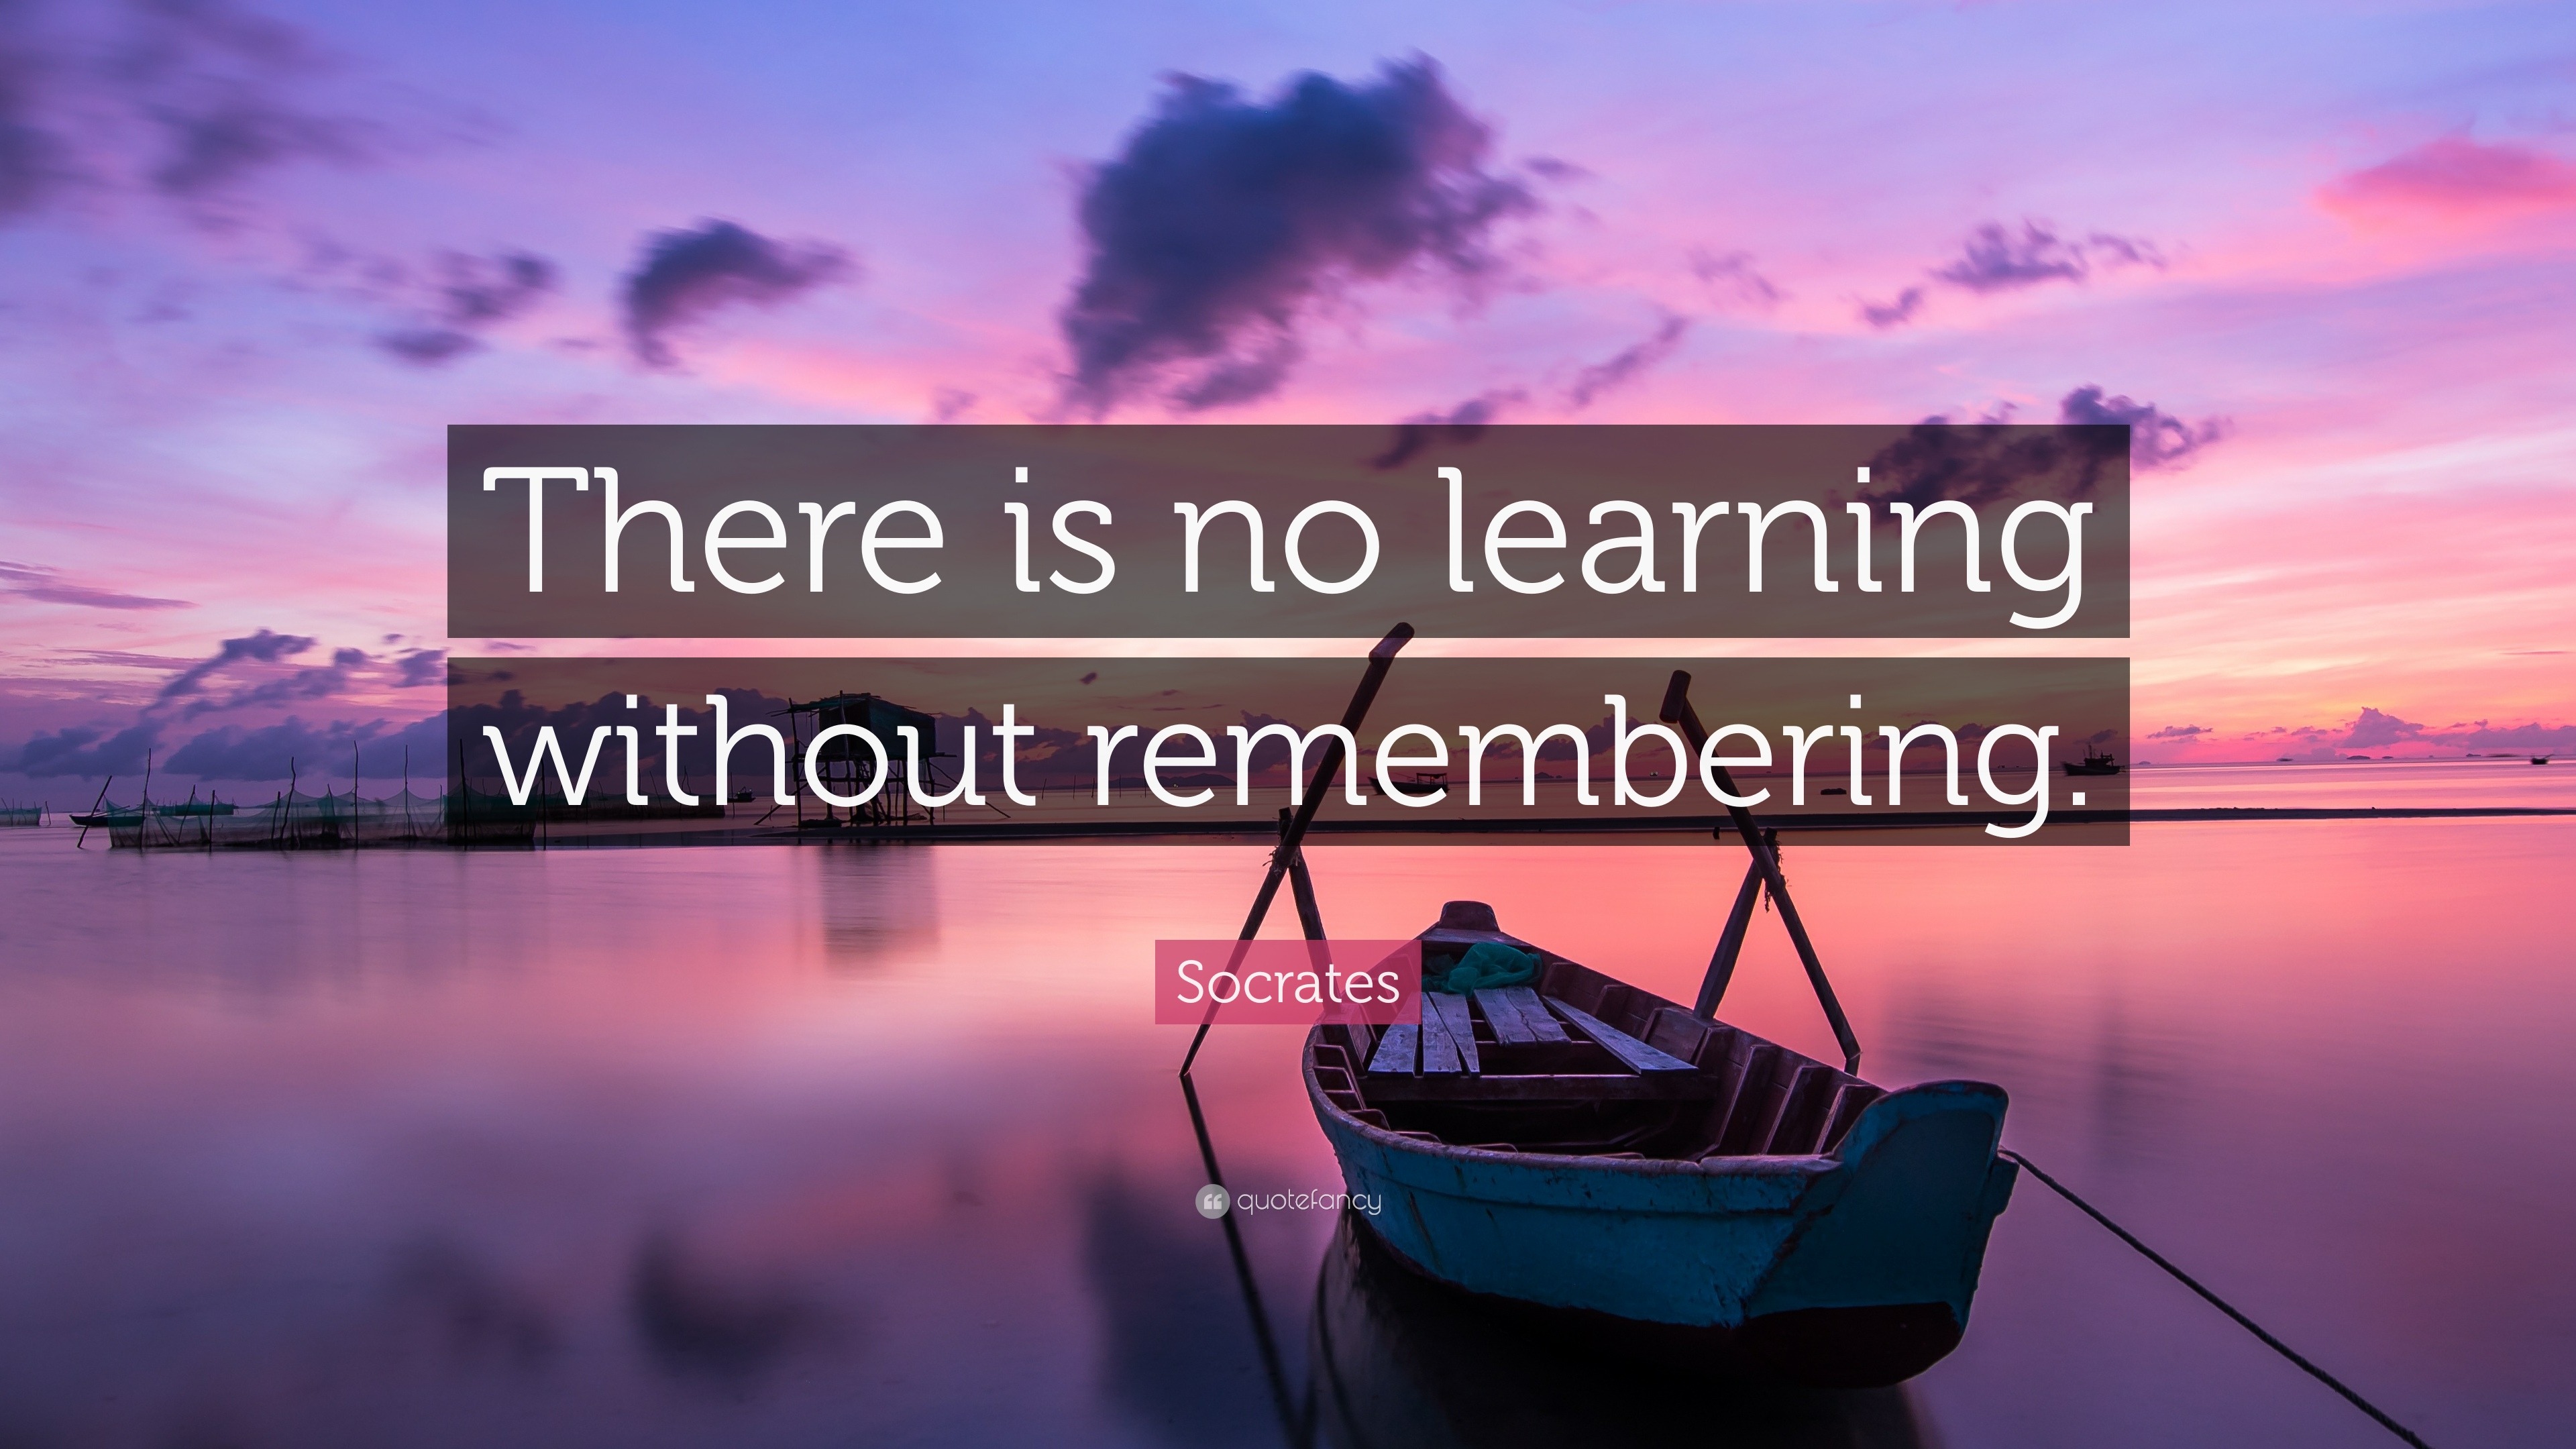 Socrates Quote: “There is no learning without remembering.” (11